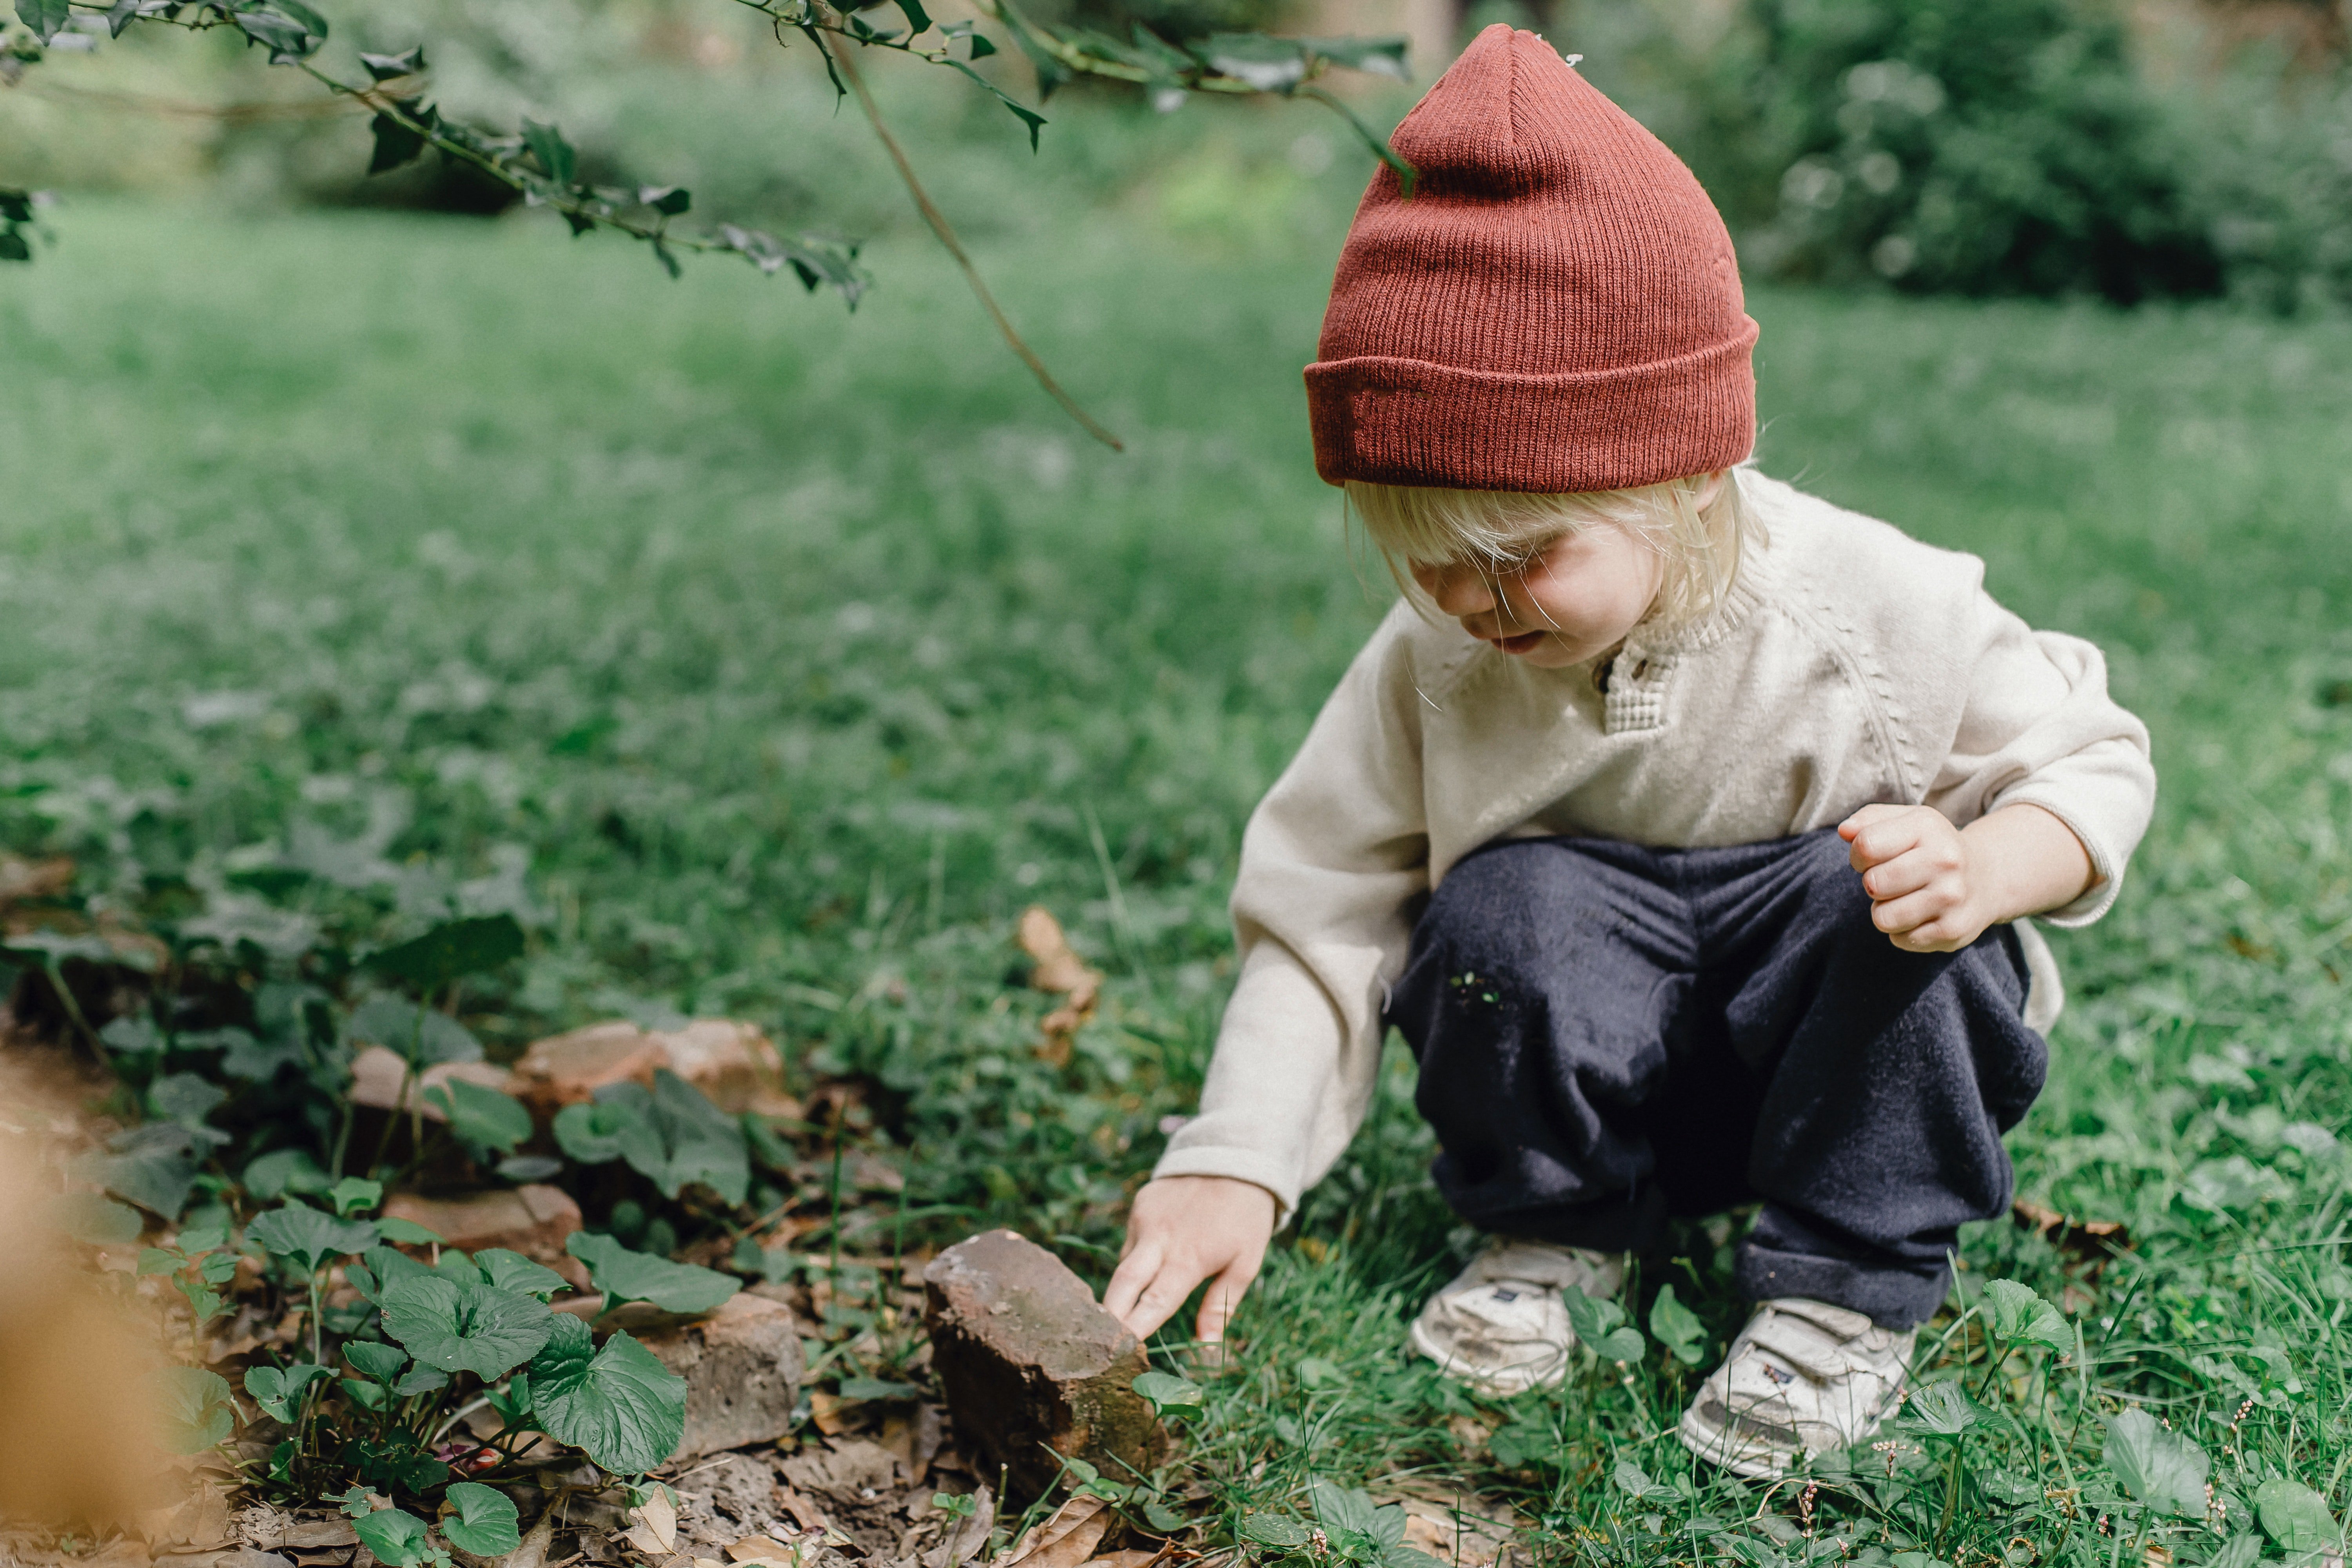 Parents online also recalled their toddlers sneaking outside the house without their consent | Photo: Pexels